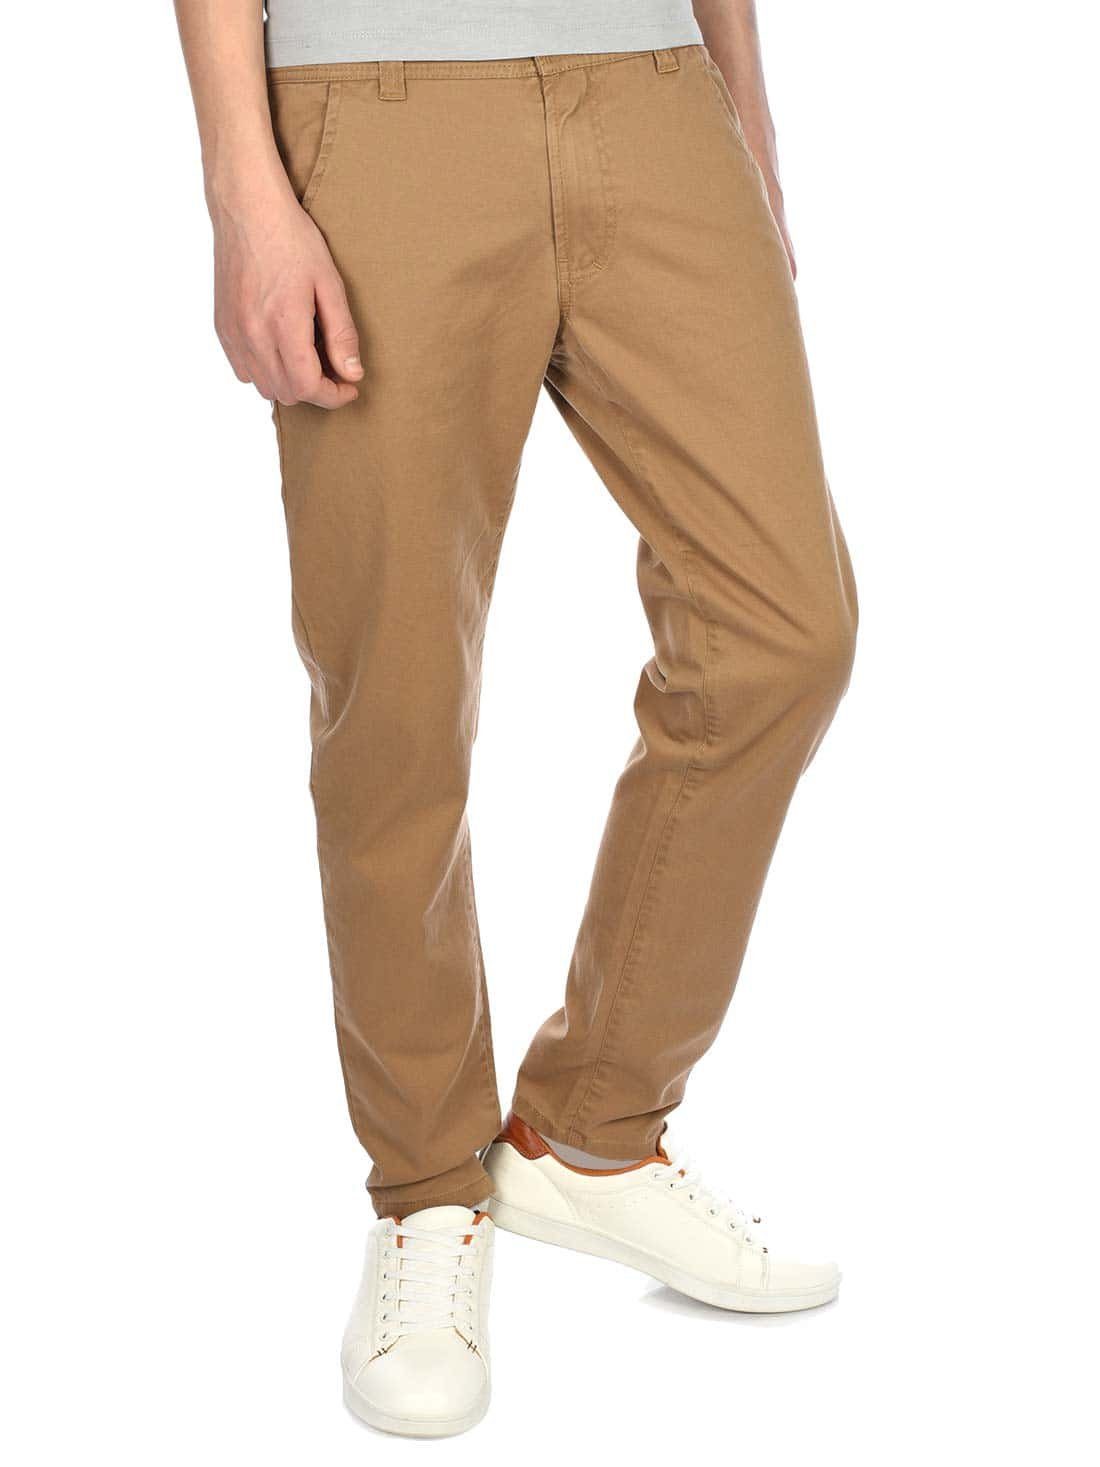 Hose Chinohose casual Beige Chino Jungen (1-tlg) BEZLIT